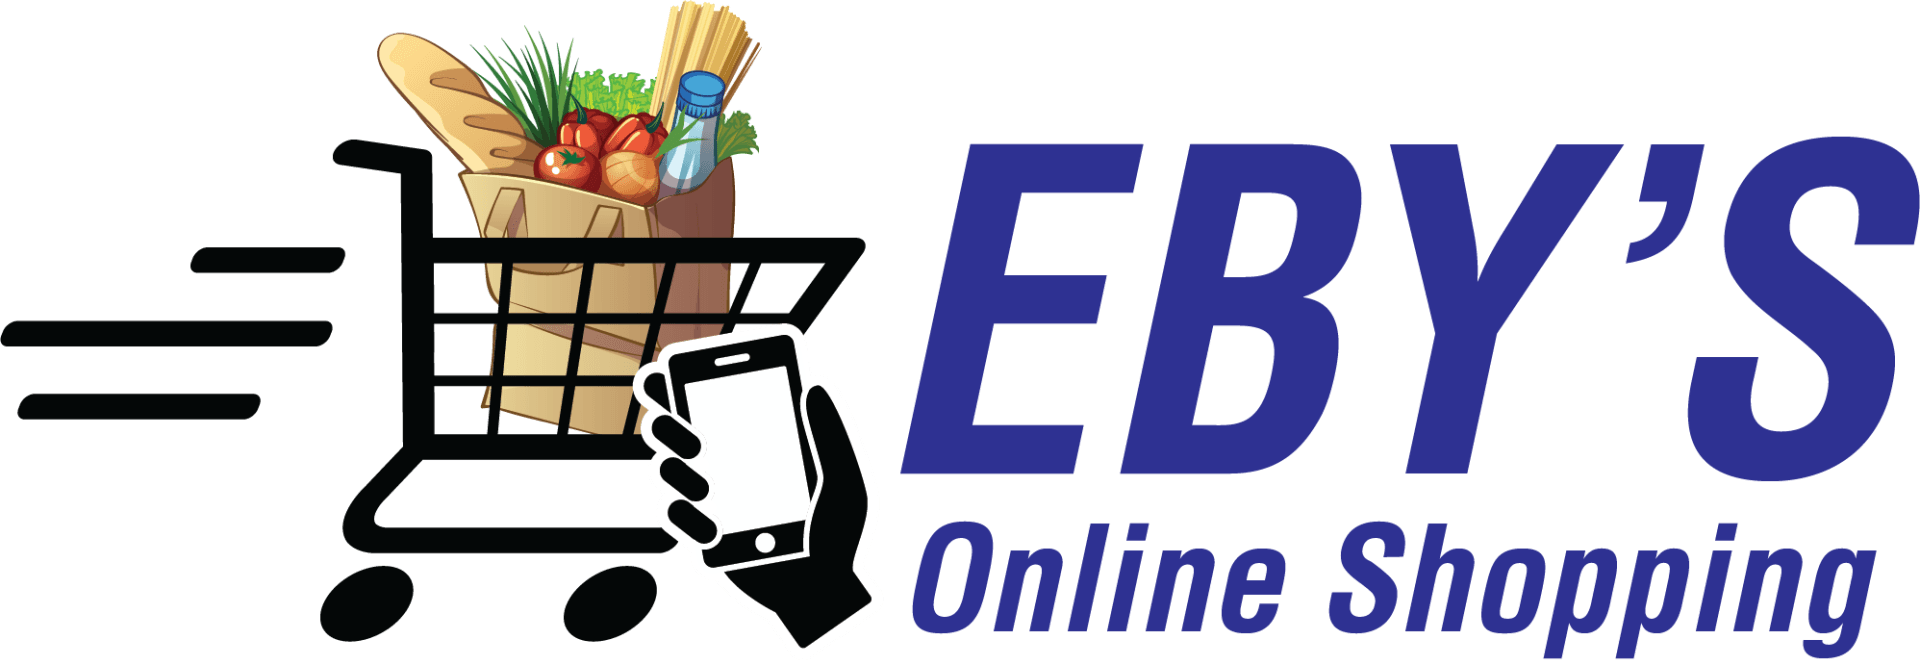 Eby's Online Shopping